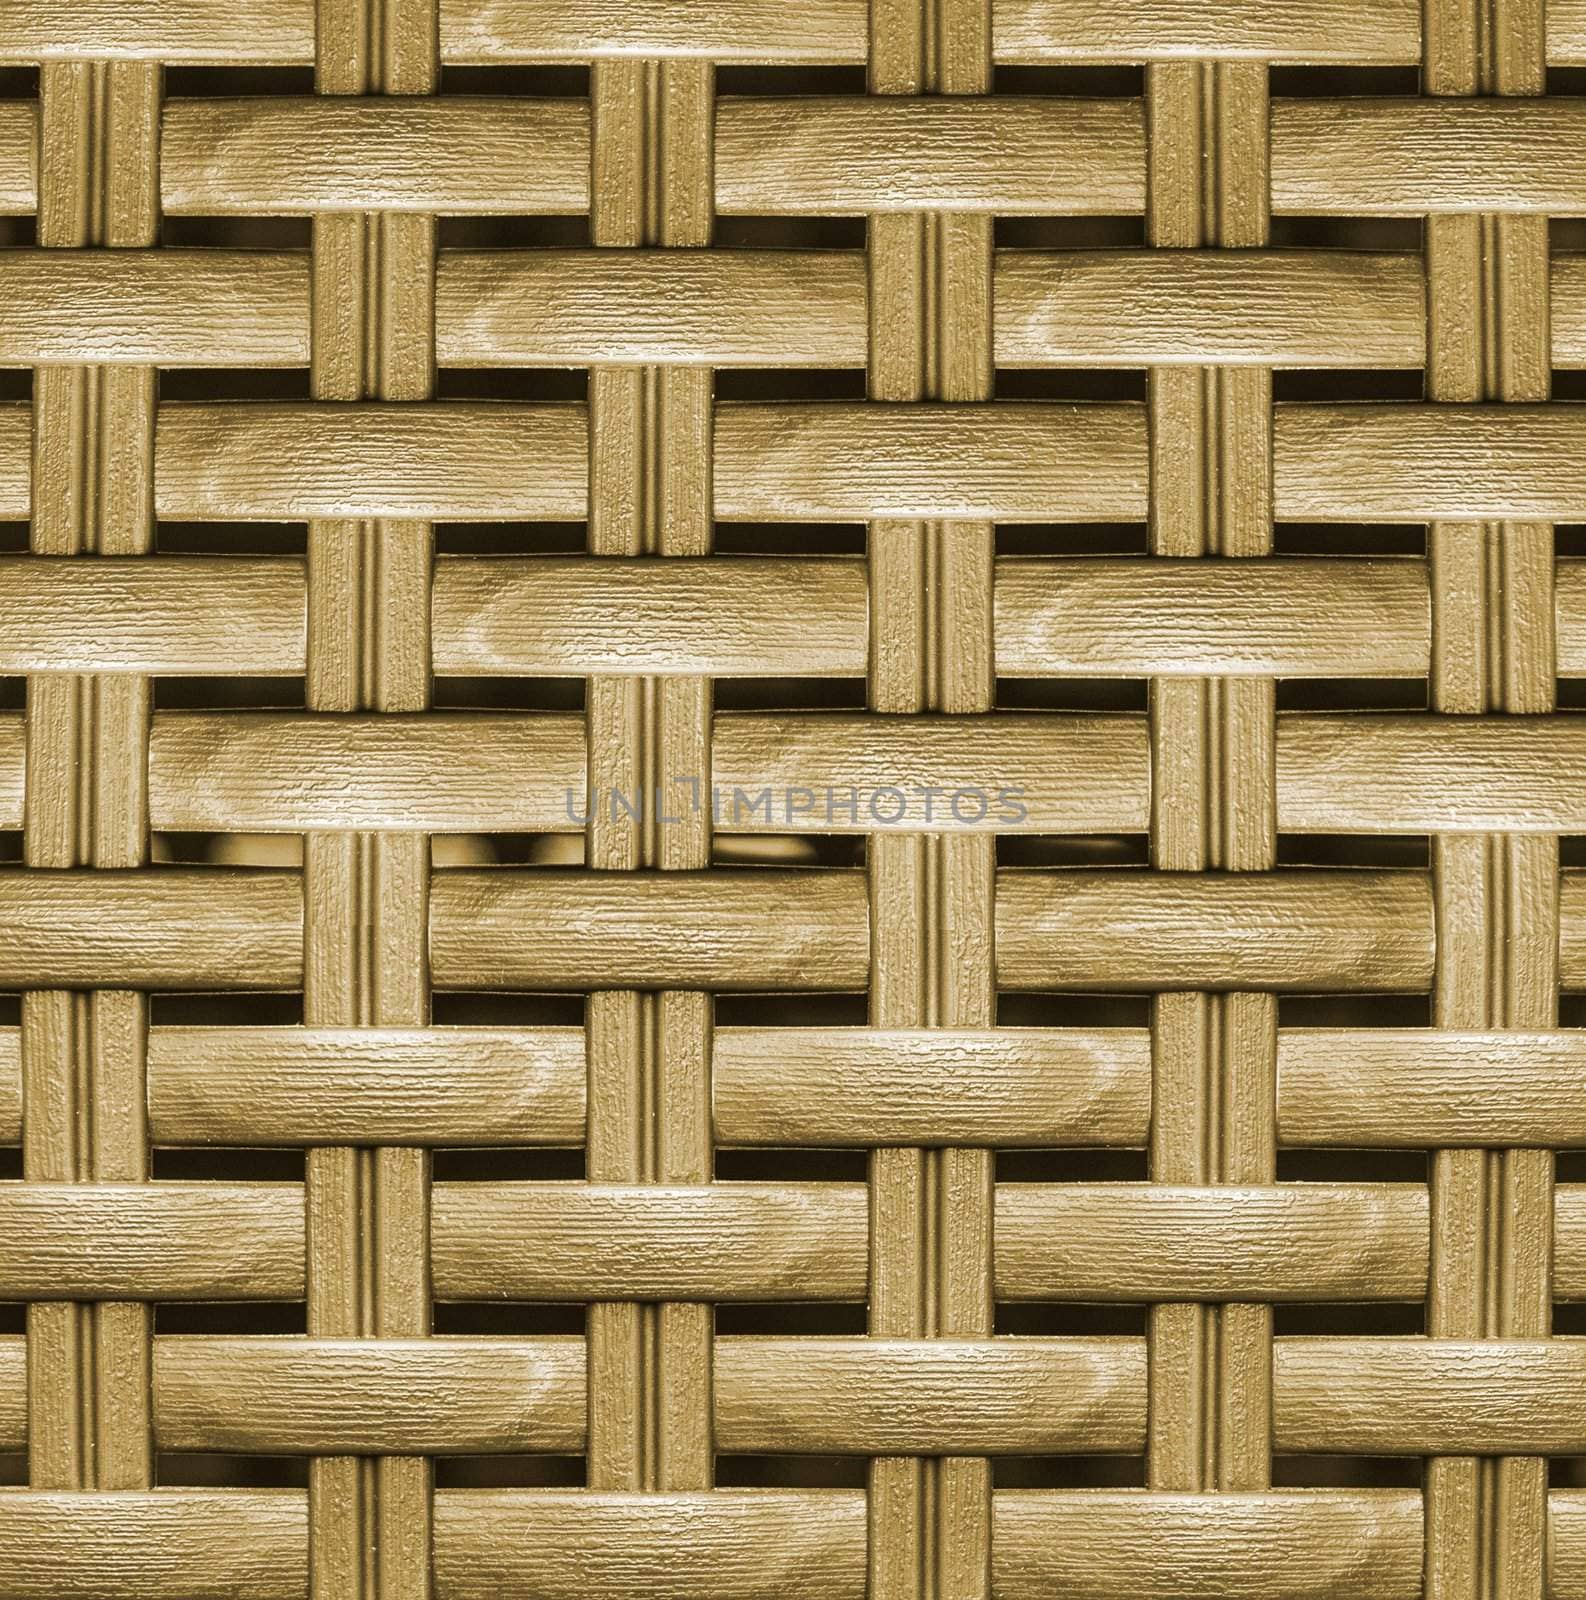 Wooden striped textured basket weaving background.  by simpson33